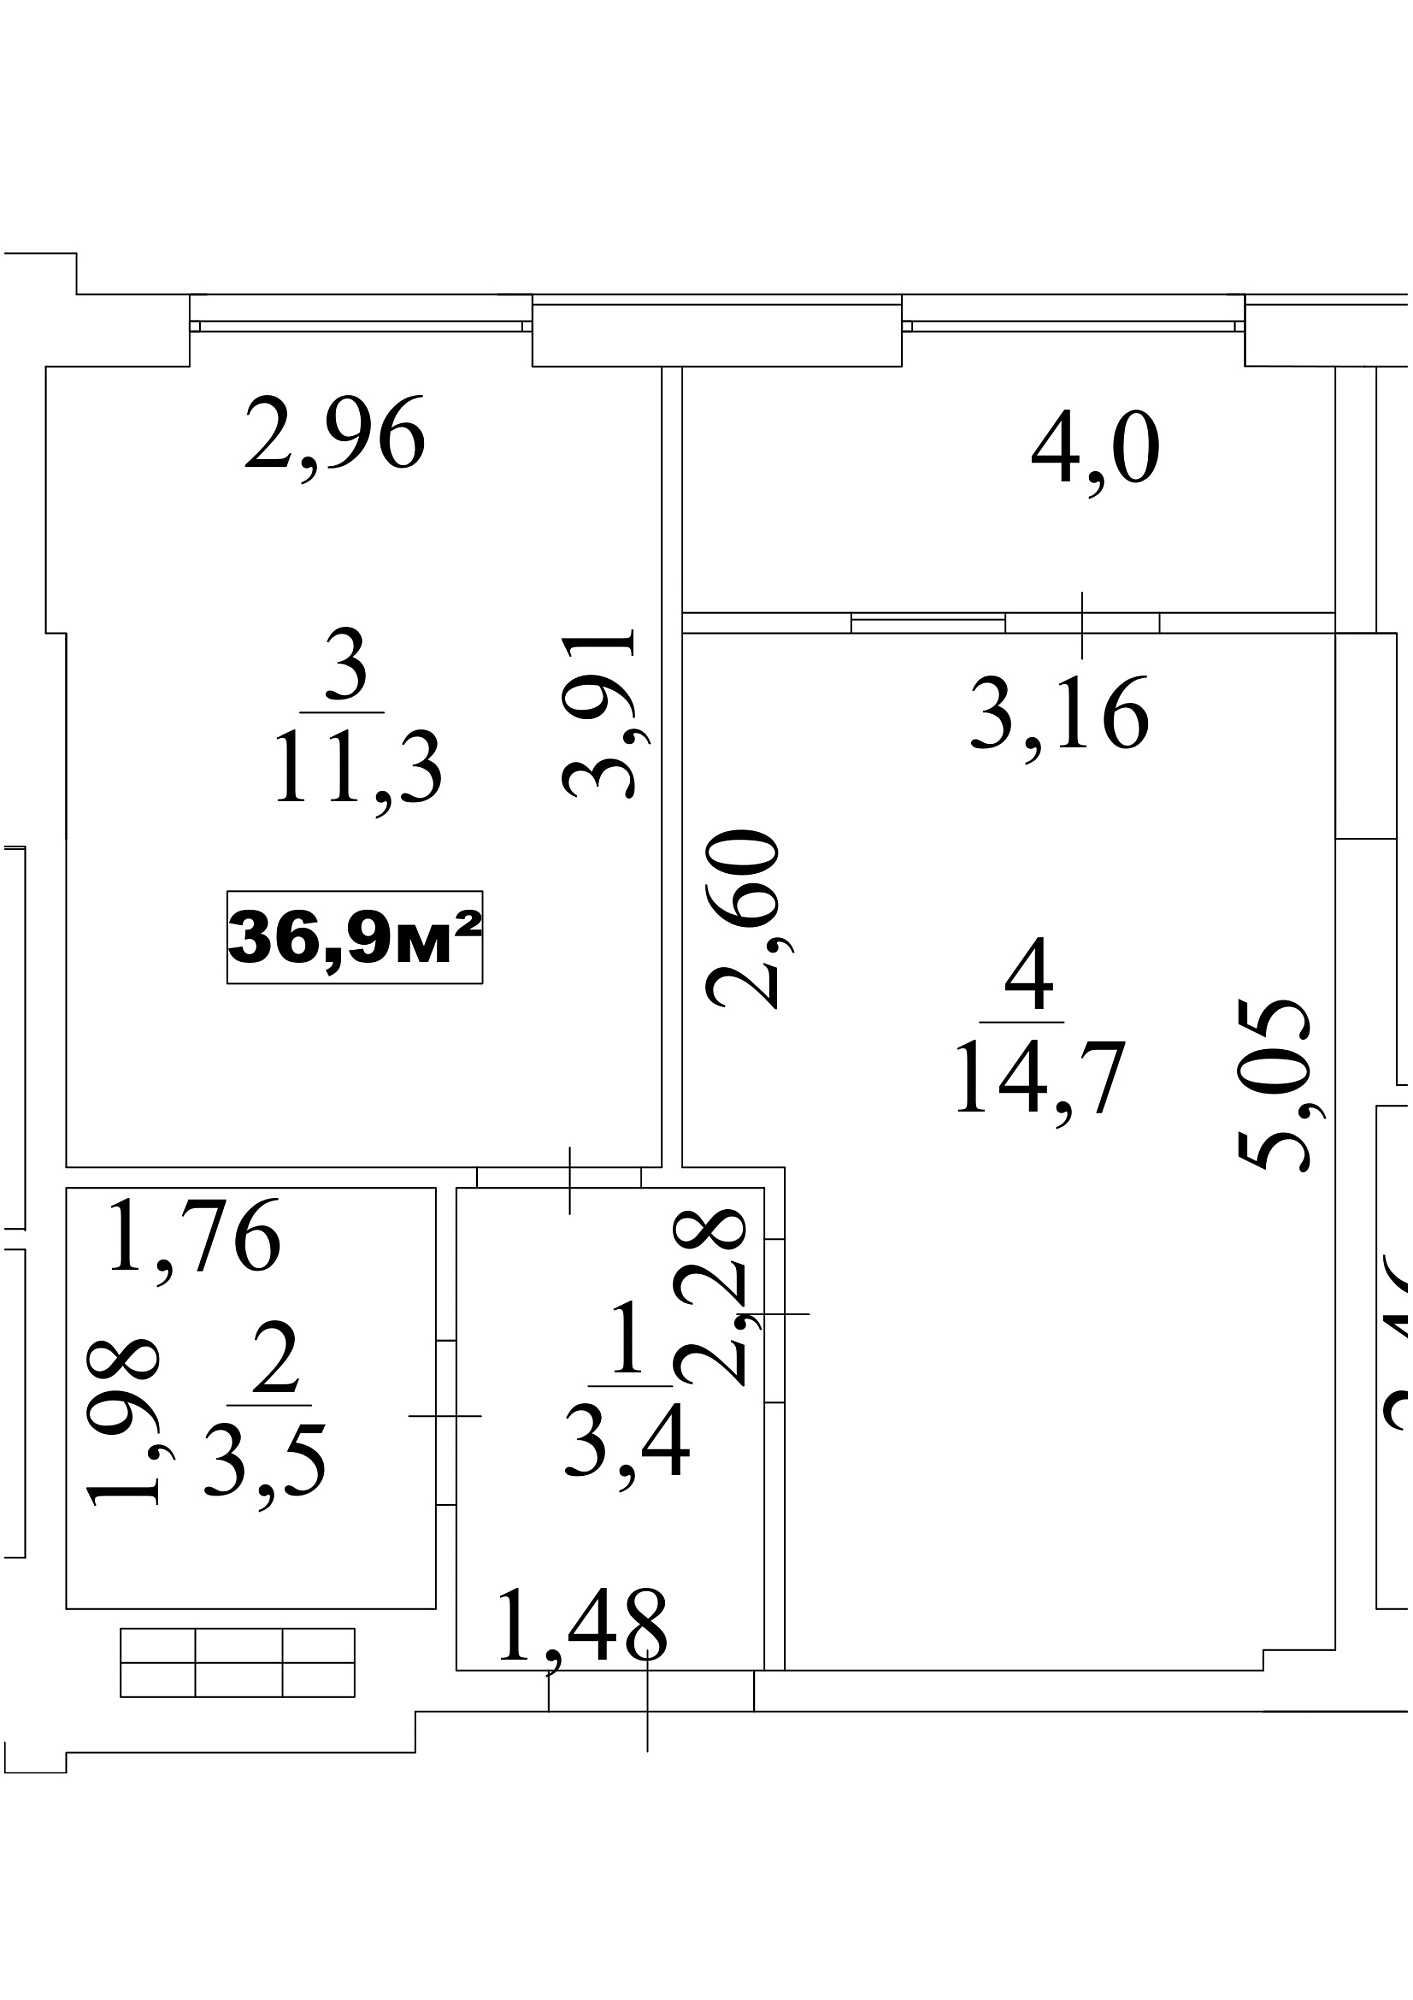 Planning 1-rm flats area 36.9m2, AB-10-07/00060.